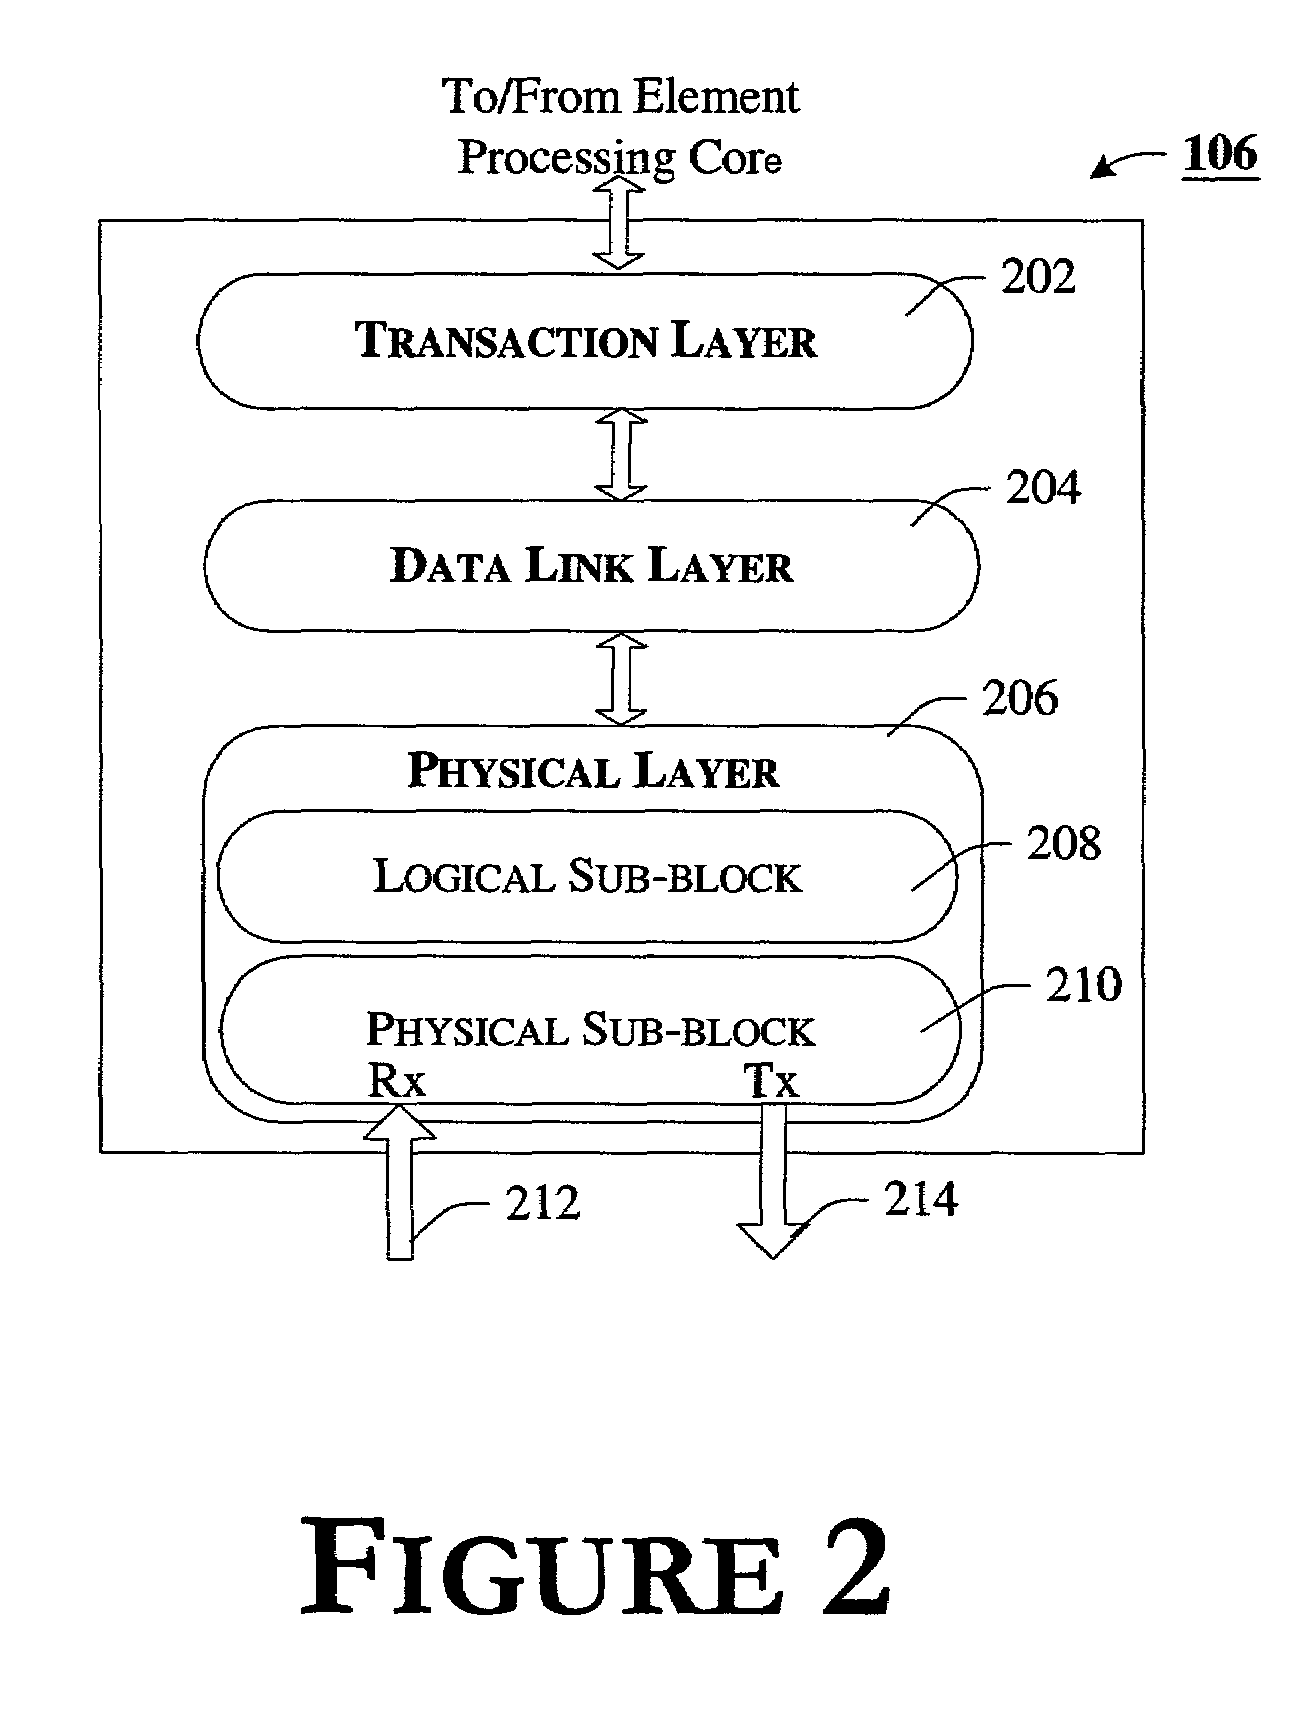 Communicating transaction types between agents in a computer system using packet headers including format and type fields